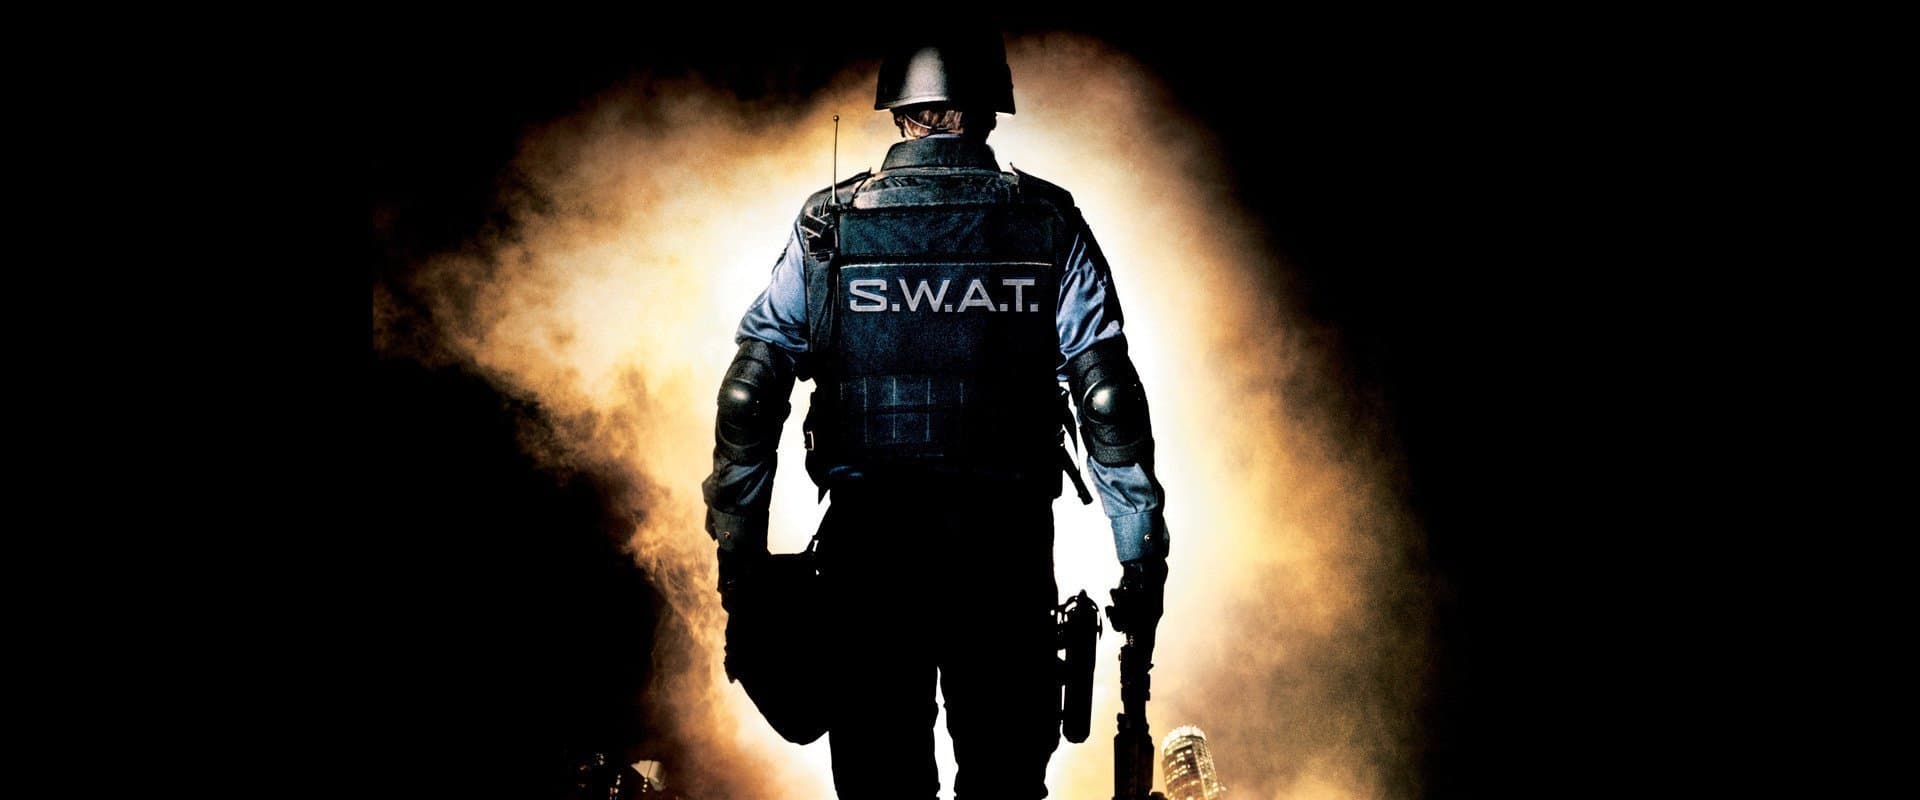 S.W.A.T. Collection